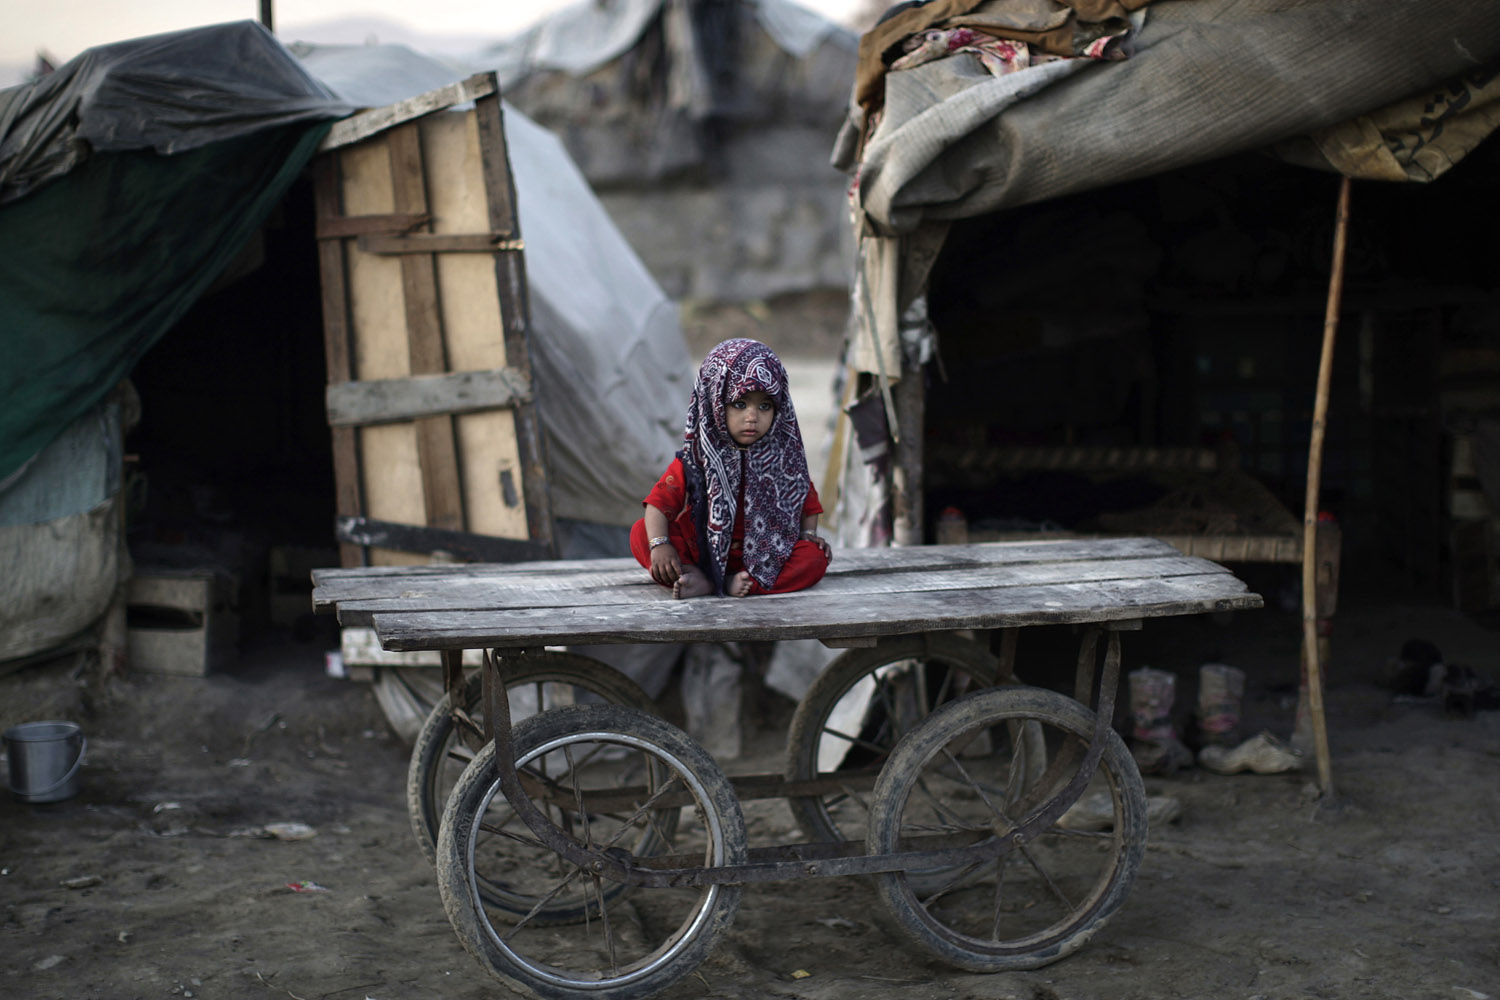 Feb. 8, 2013. A Pakistani child sits on a wooden cart outside her family's makeshift home on the outskirts of Islamabad.